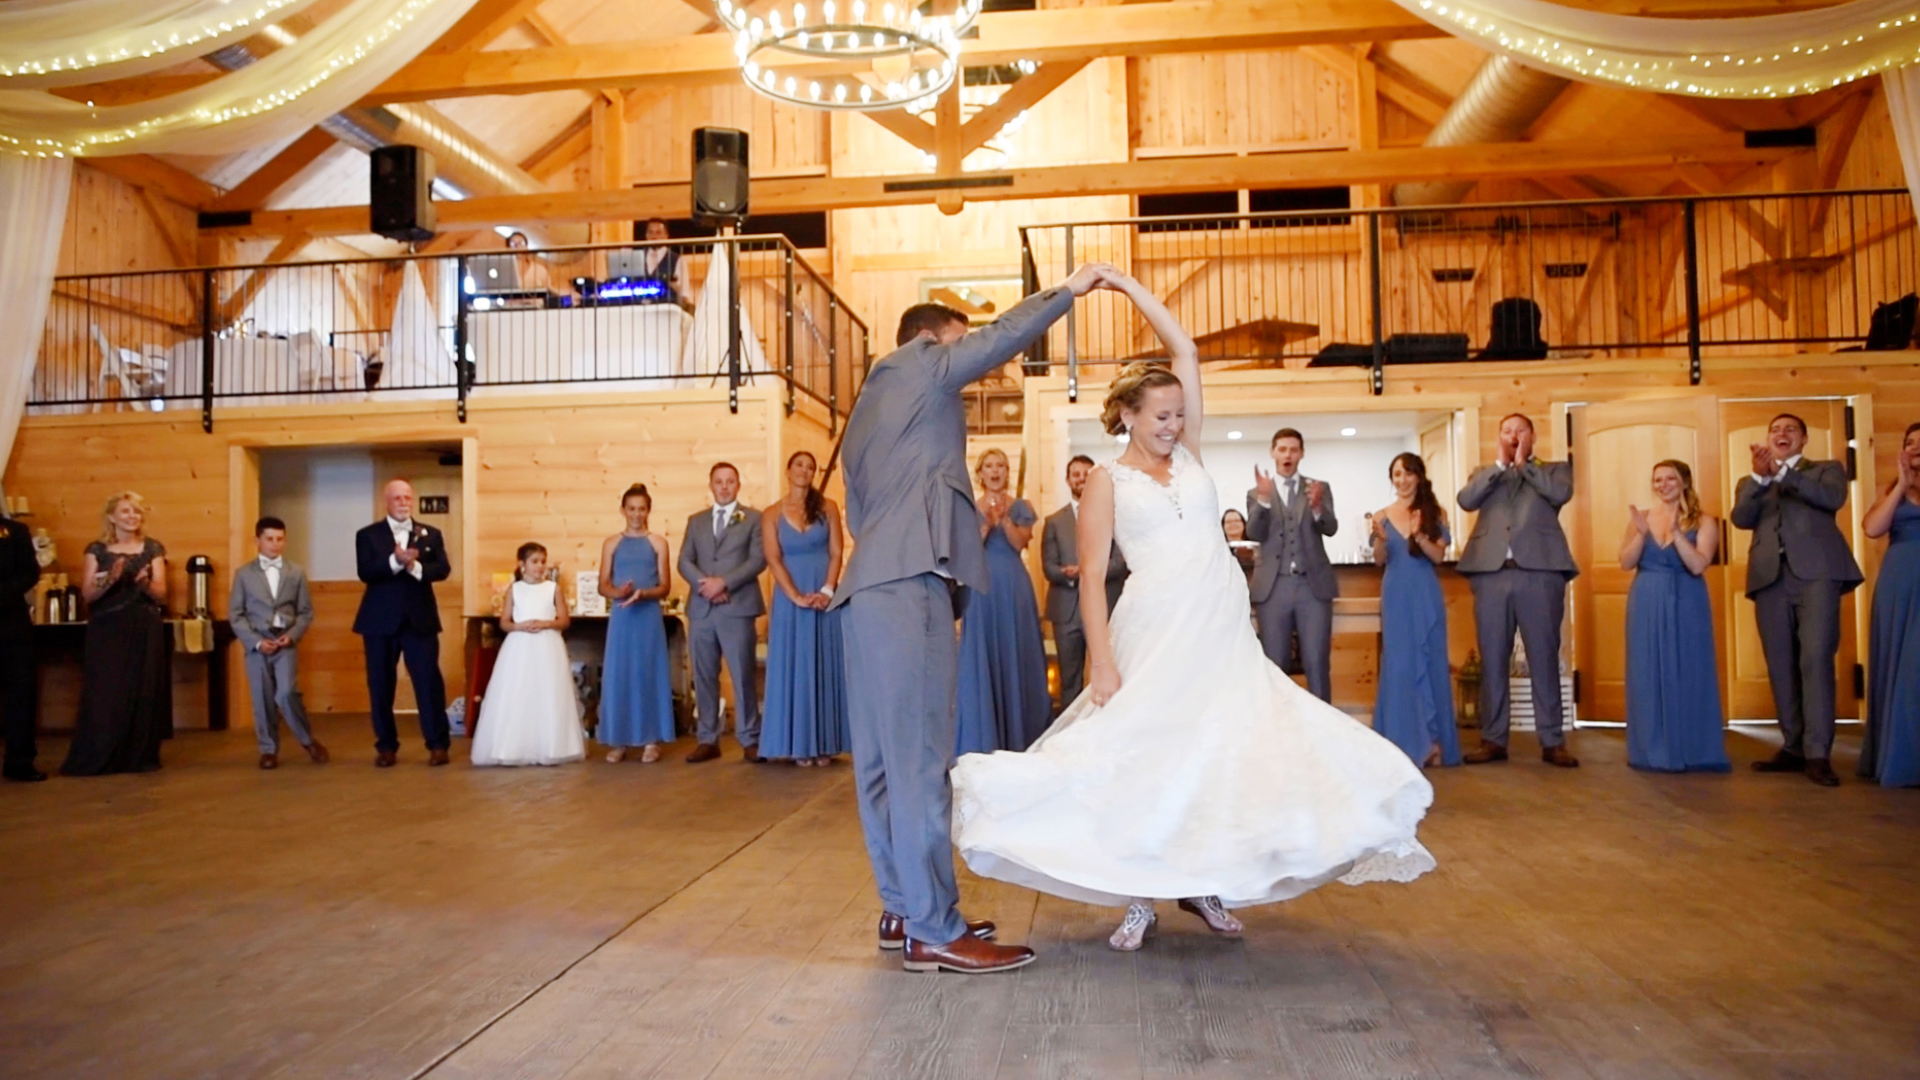 summer wedding first dance inside the barn at fortune valley manor in saugerties ny